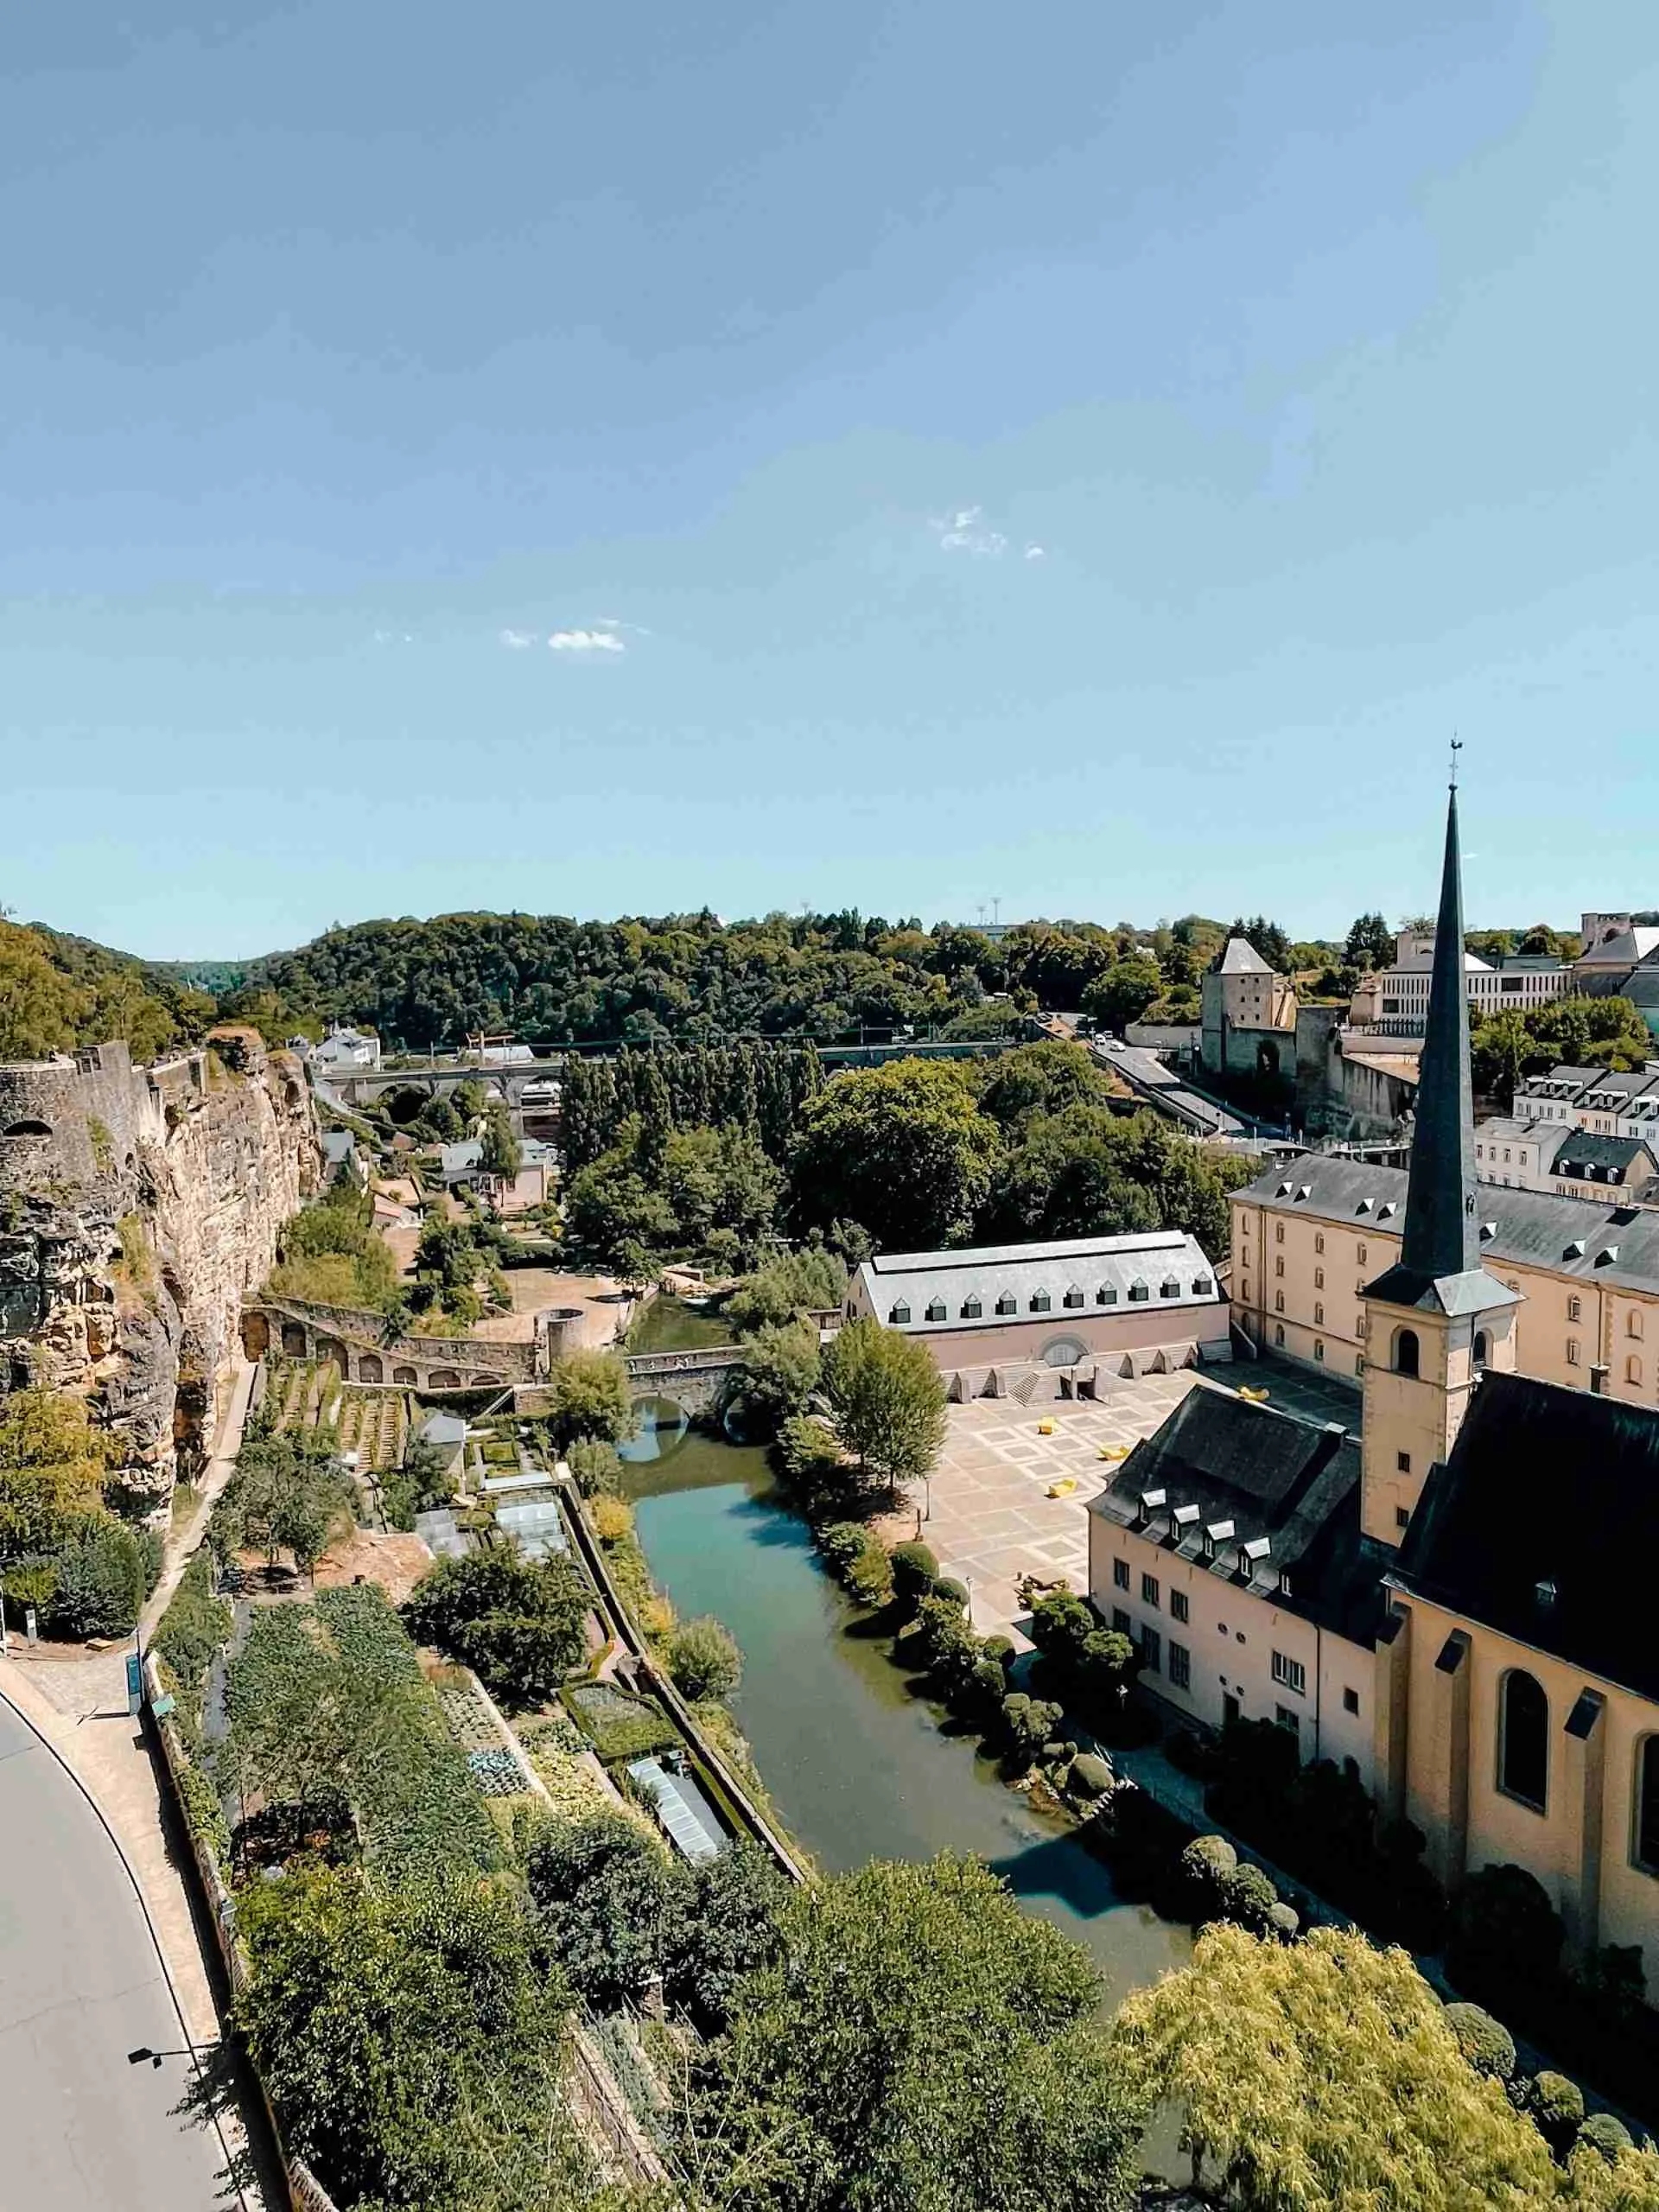 View overlooking the Lower City of Luxembourg - the Grund 